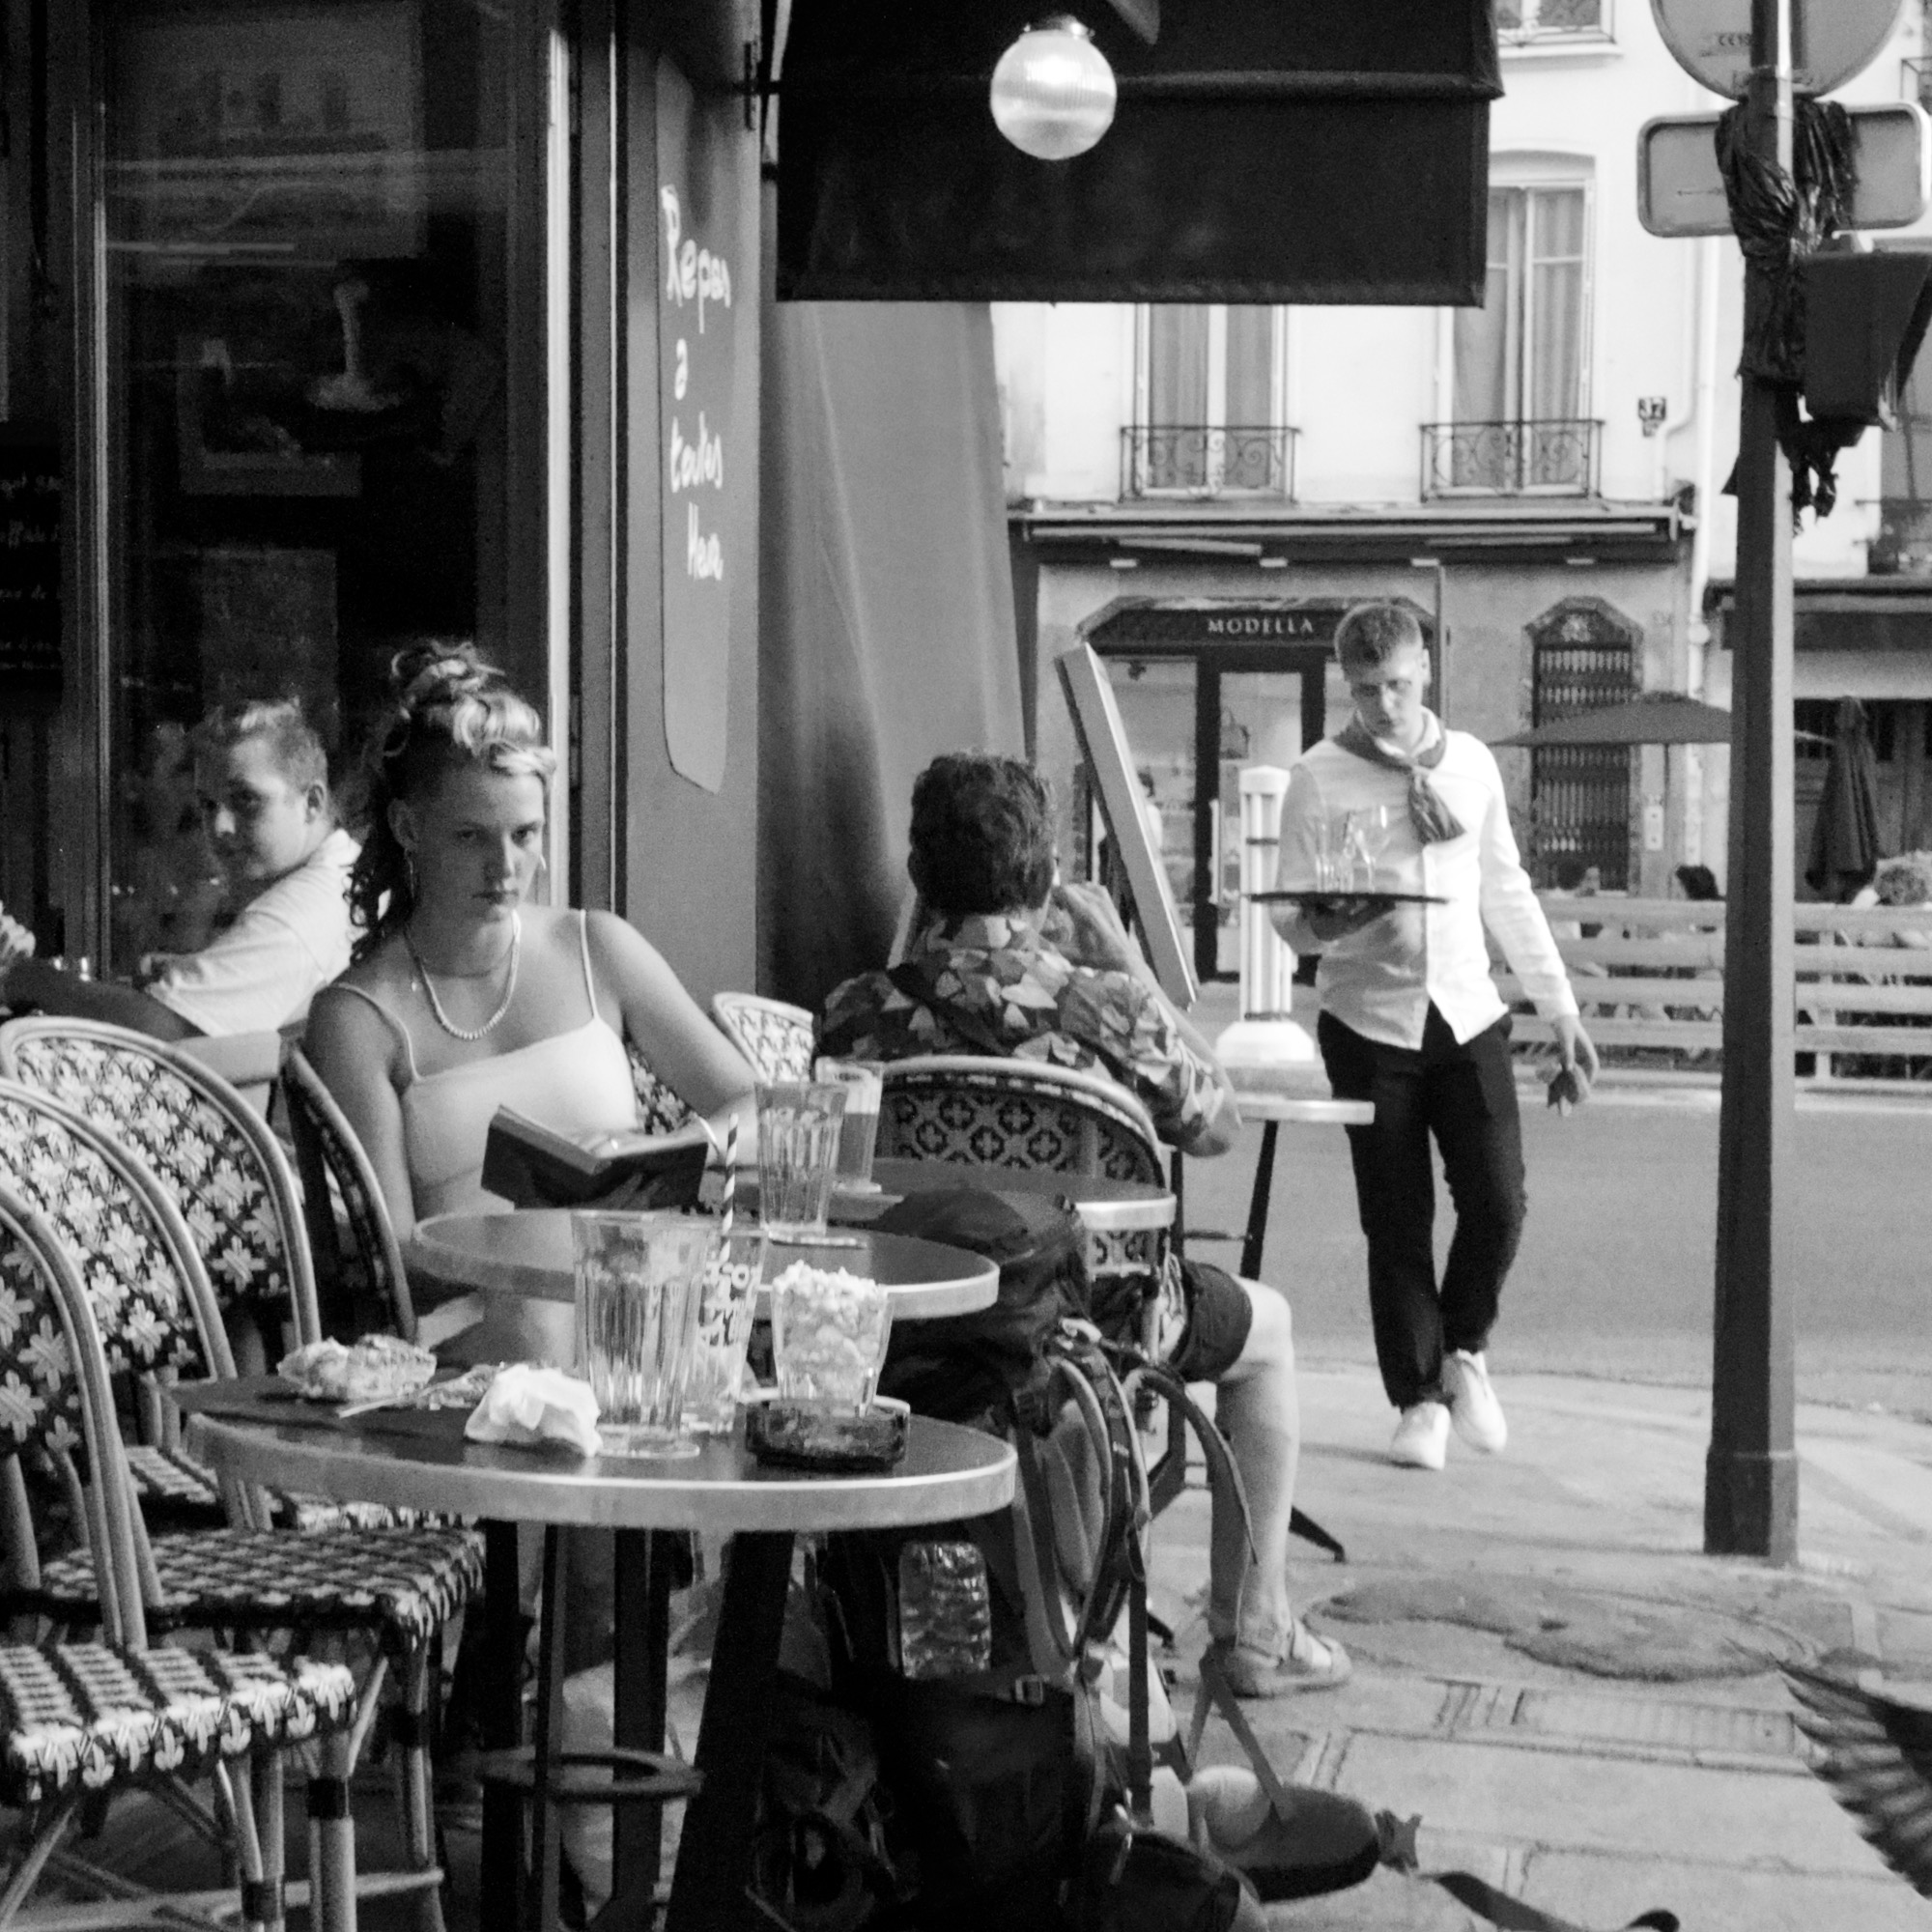 A photo of people outside a cafe